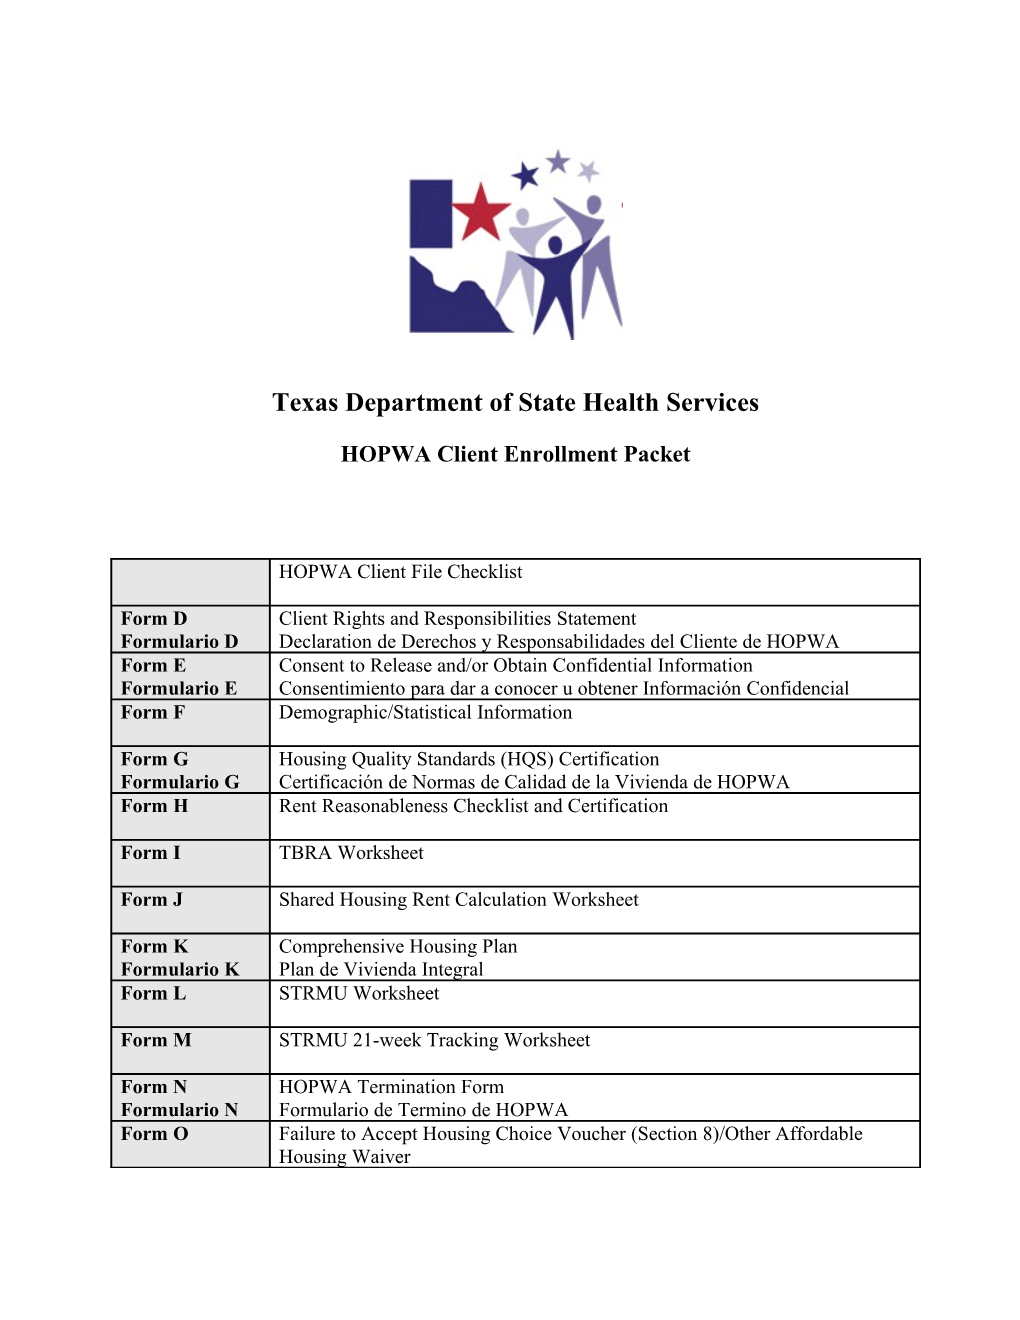 Texas Department of State Health Services s3